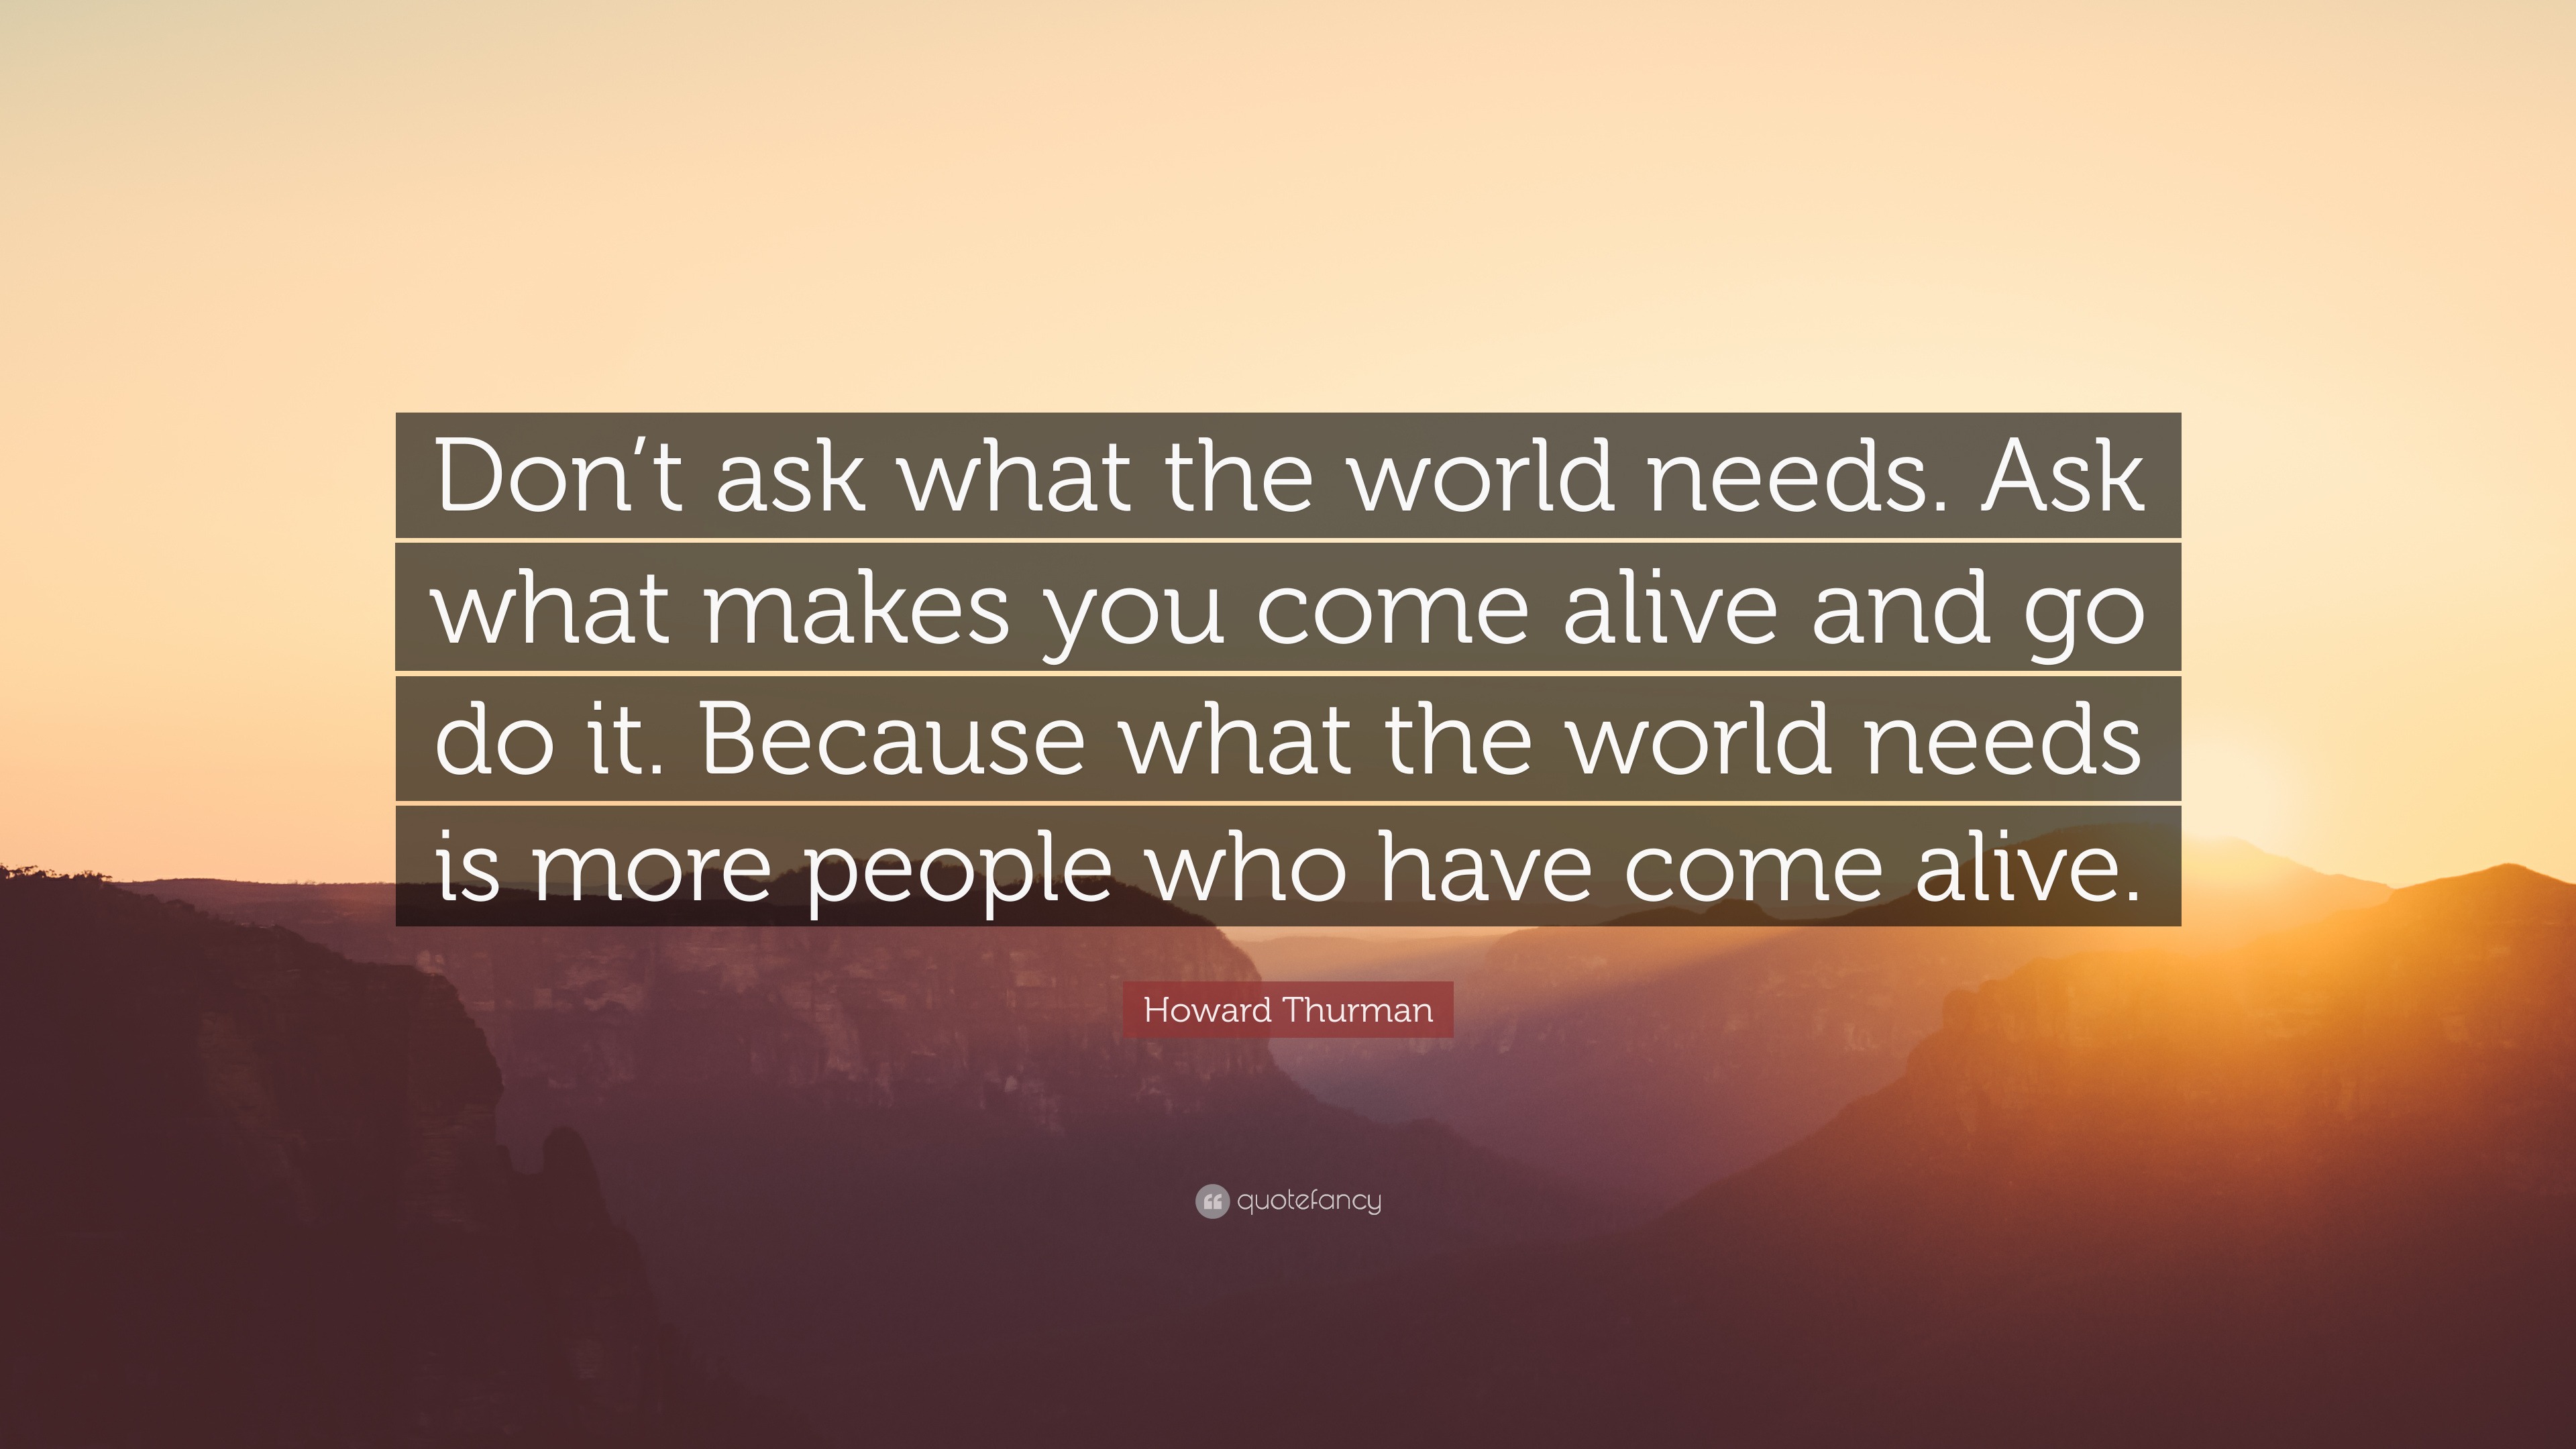 Howard Thurman Quote “don T Ask What The World Needs Ask What Makes You Come Alive And Go Do